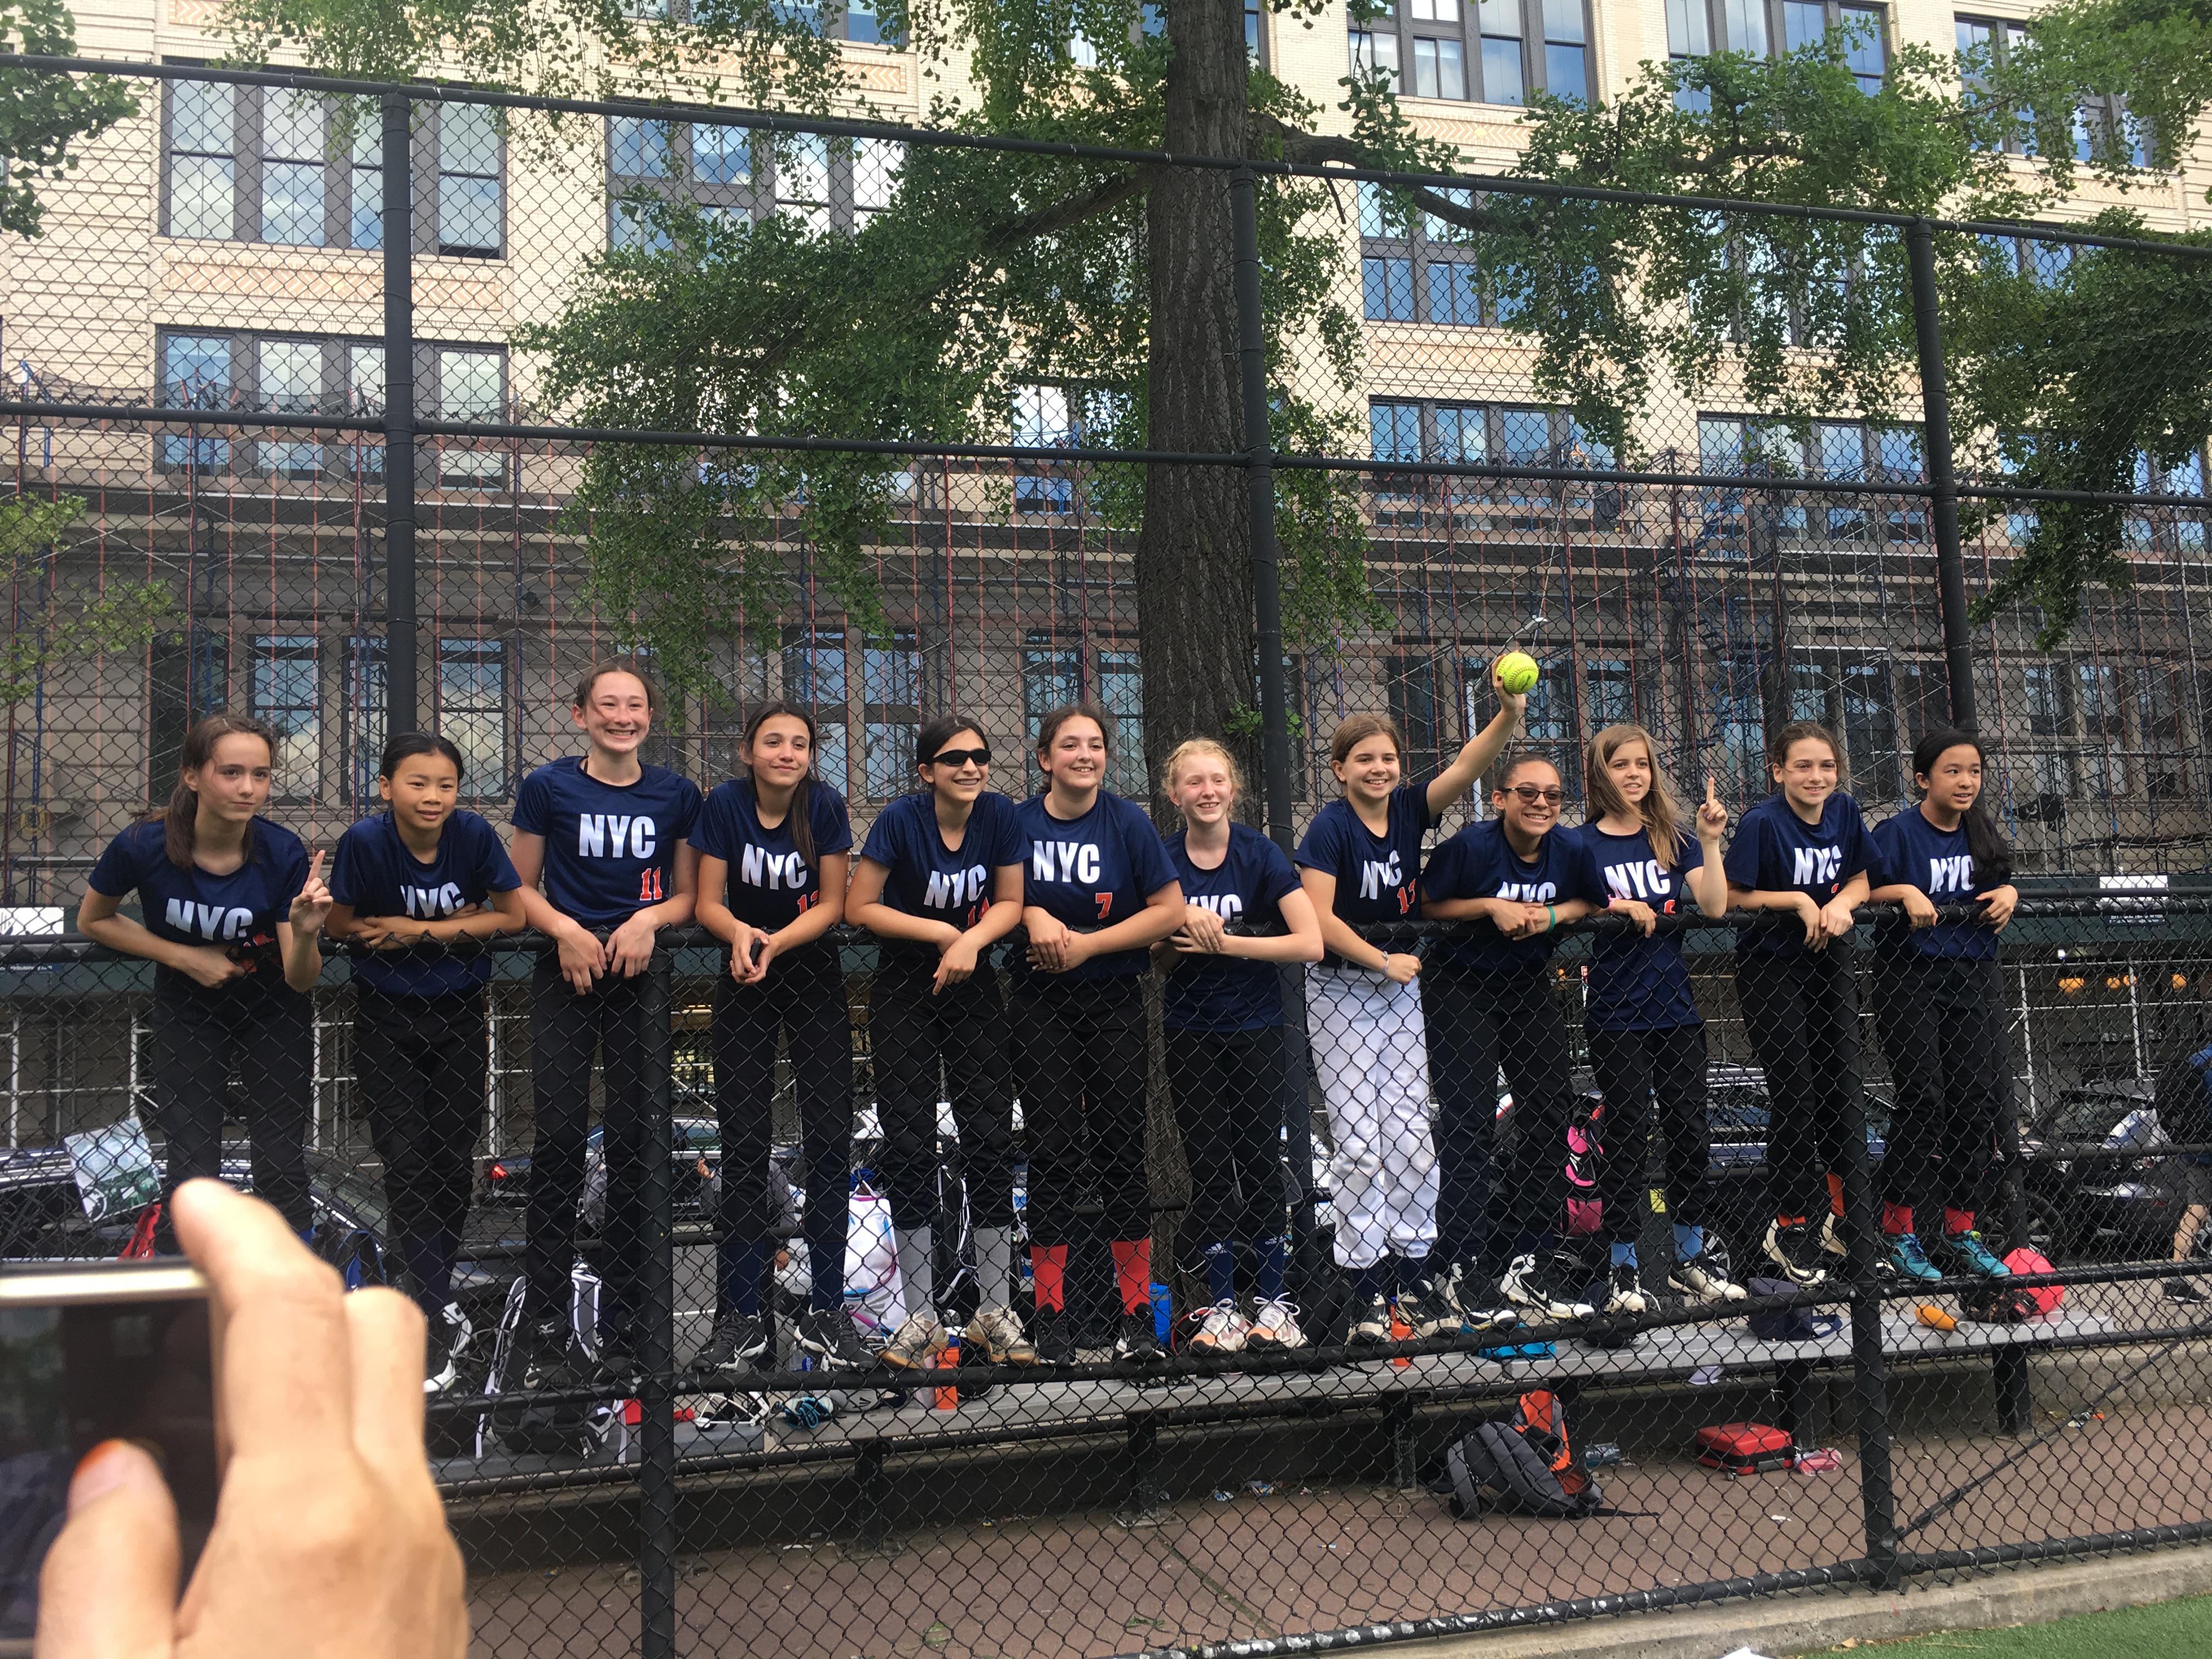 West Side and Greenwich Village's Combined 12u team